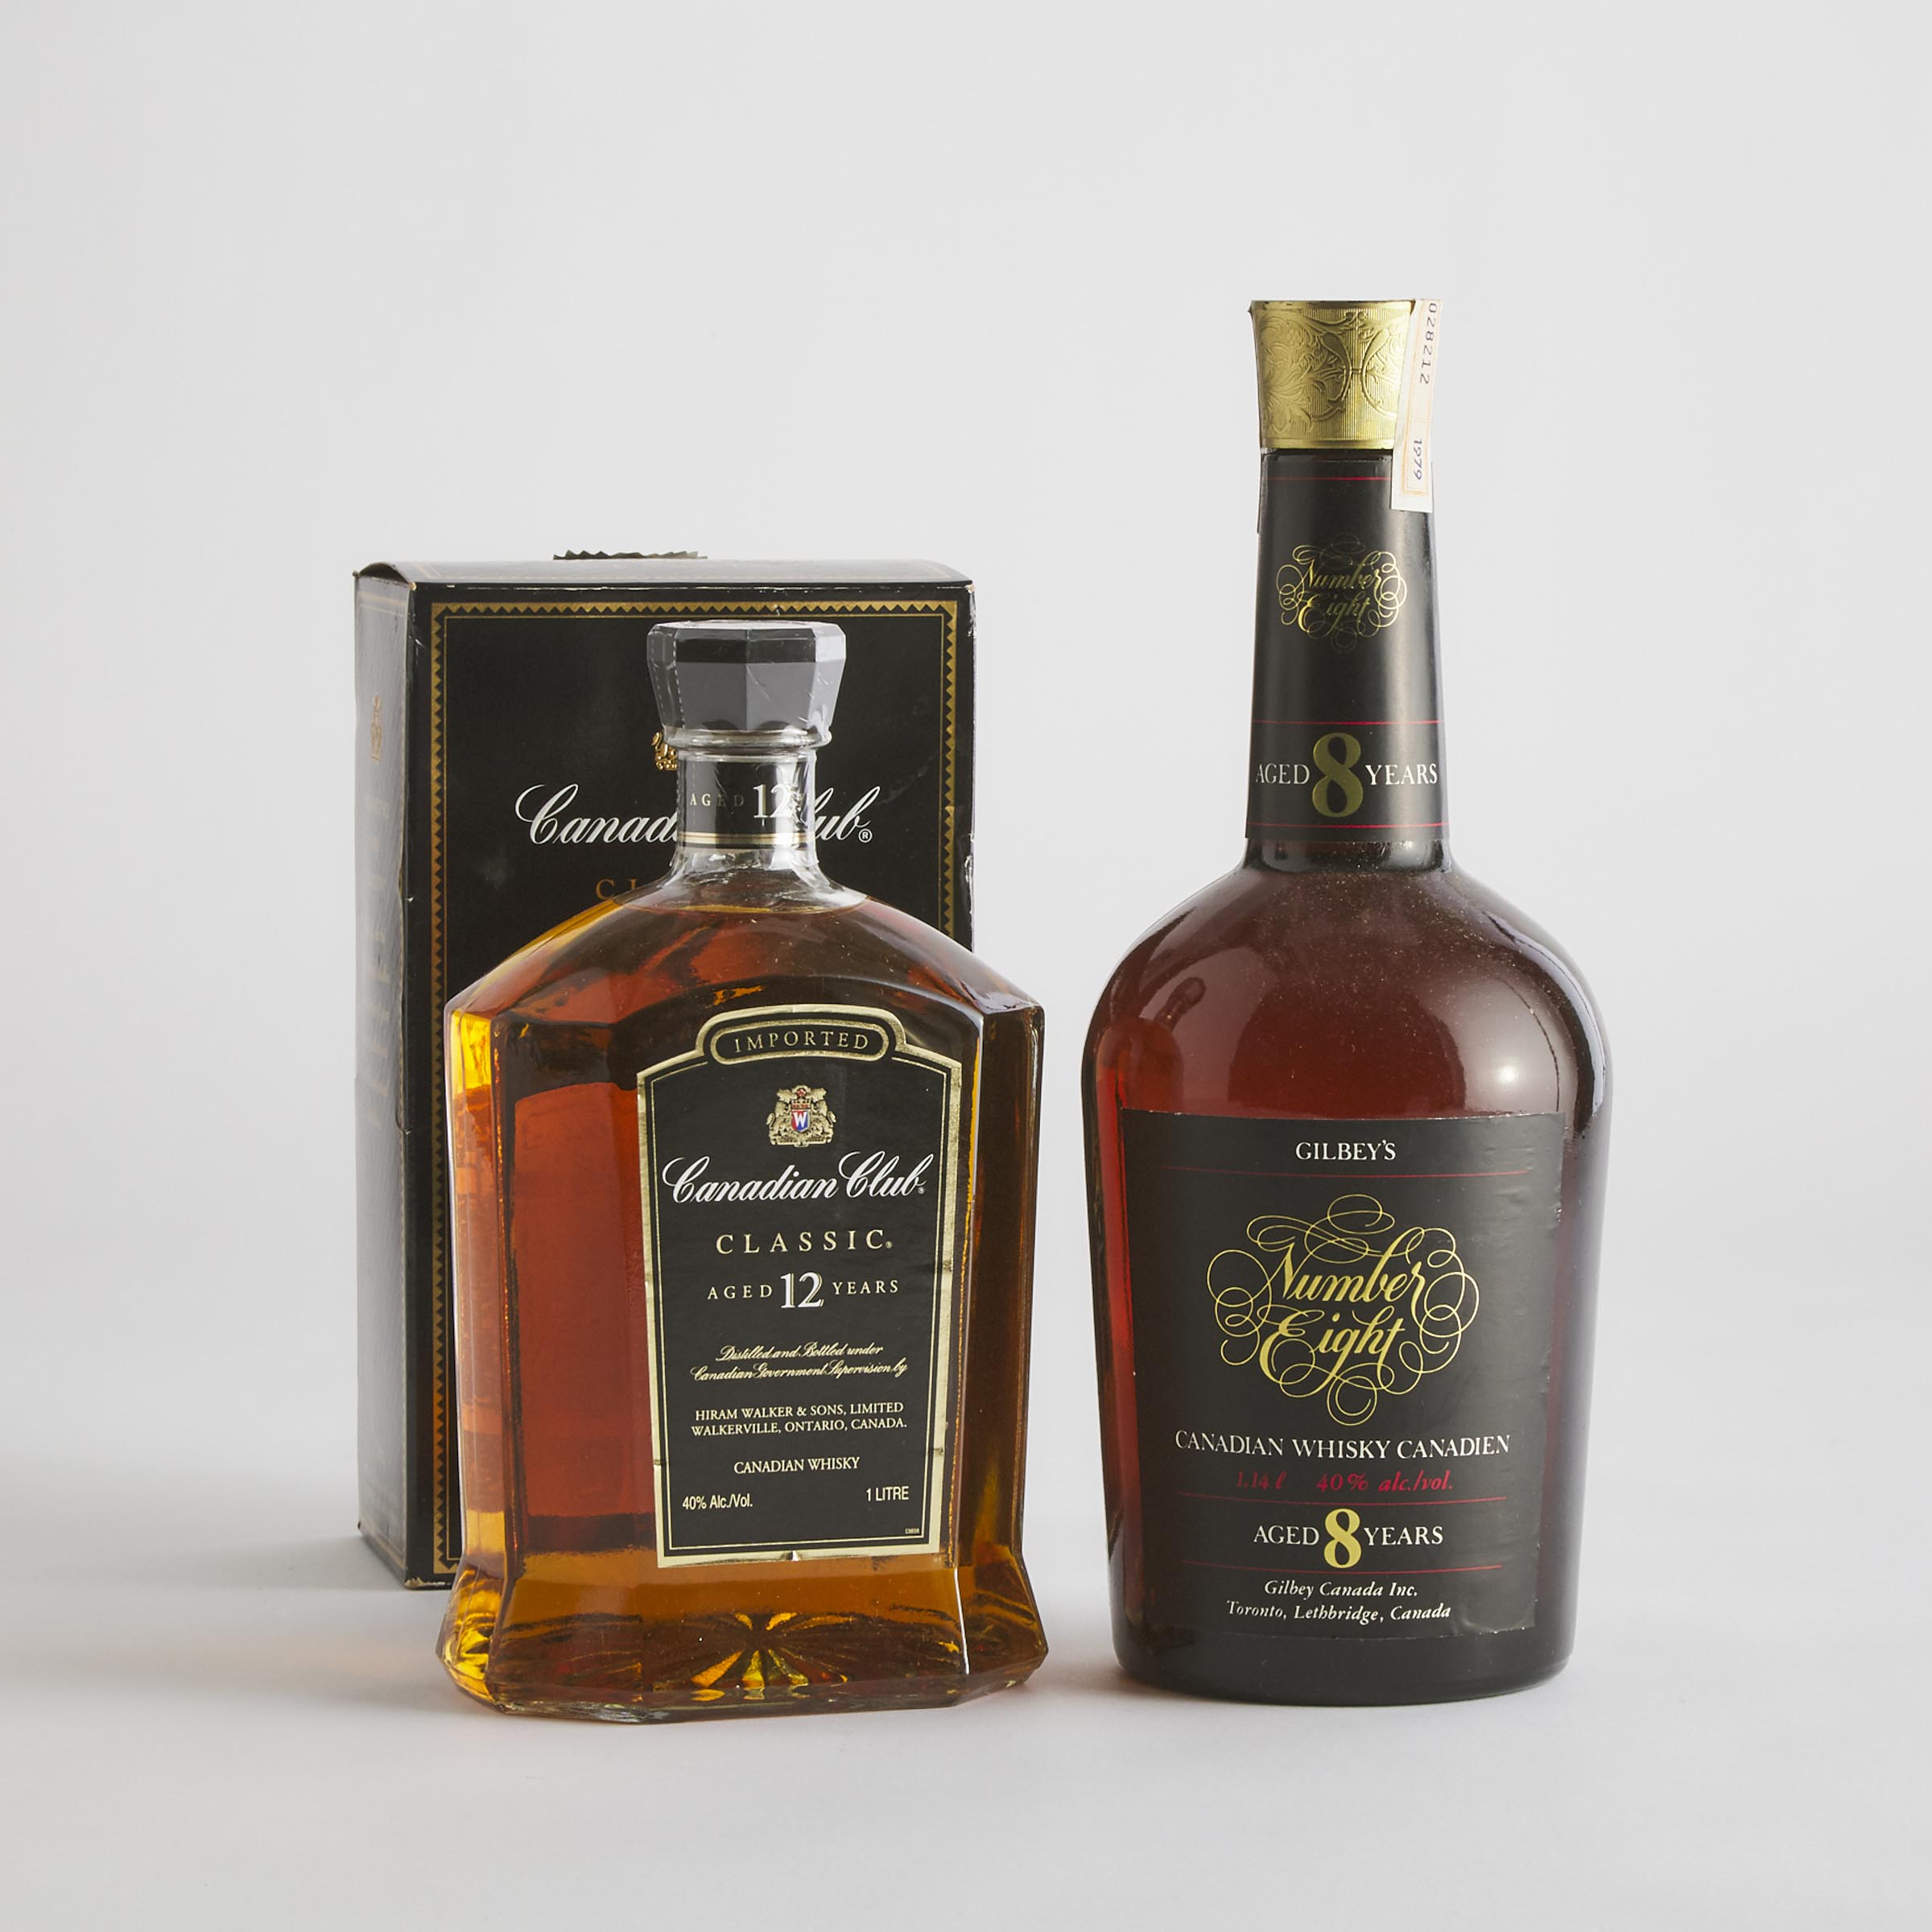 CANADIAN CLUB CLASSIC CANADIAN WHISKY 12 YEARS (ONE 1000 ML)
GILBY'S BLENDED CANADIAN WHISKY NUMBER EIGHT 8 YEARS (ONE 1140 ML)